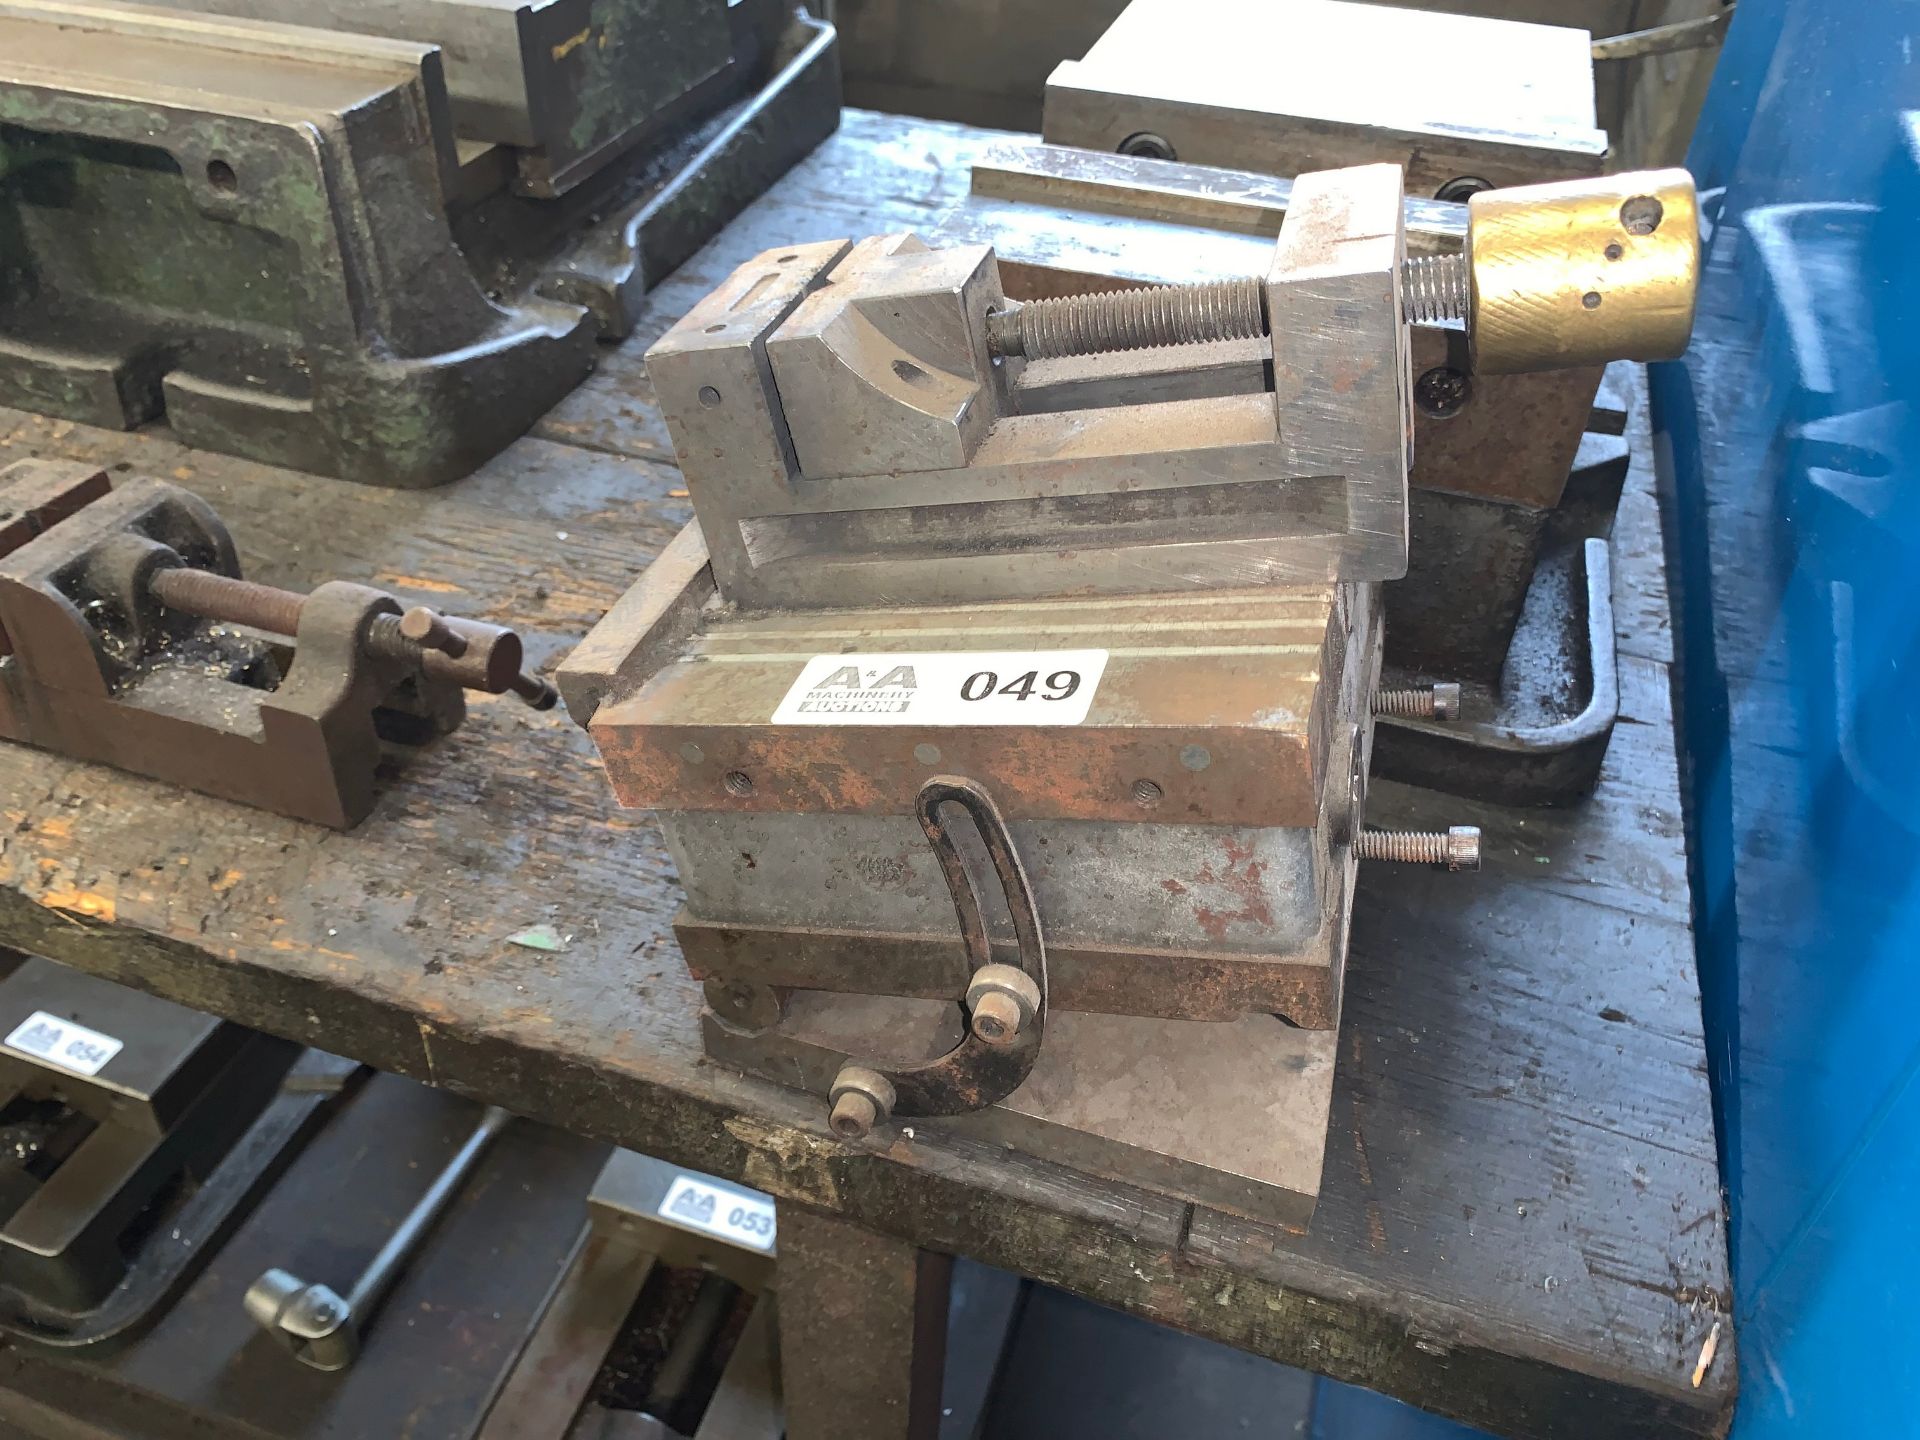 Tiliting Magnetic Sine Plate with 2-1/2" Machine Vise (Buyer is Responsible for ALL Packaging, - Image 2 of 2